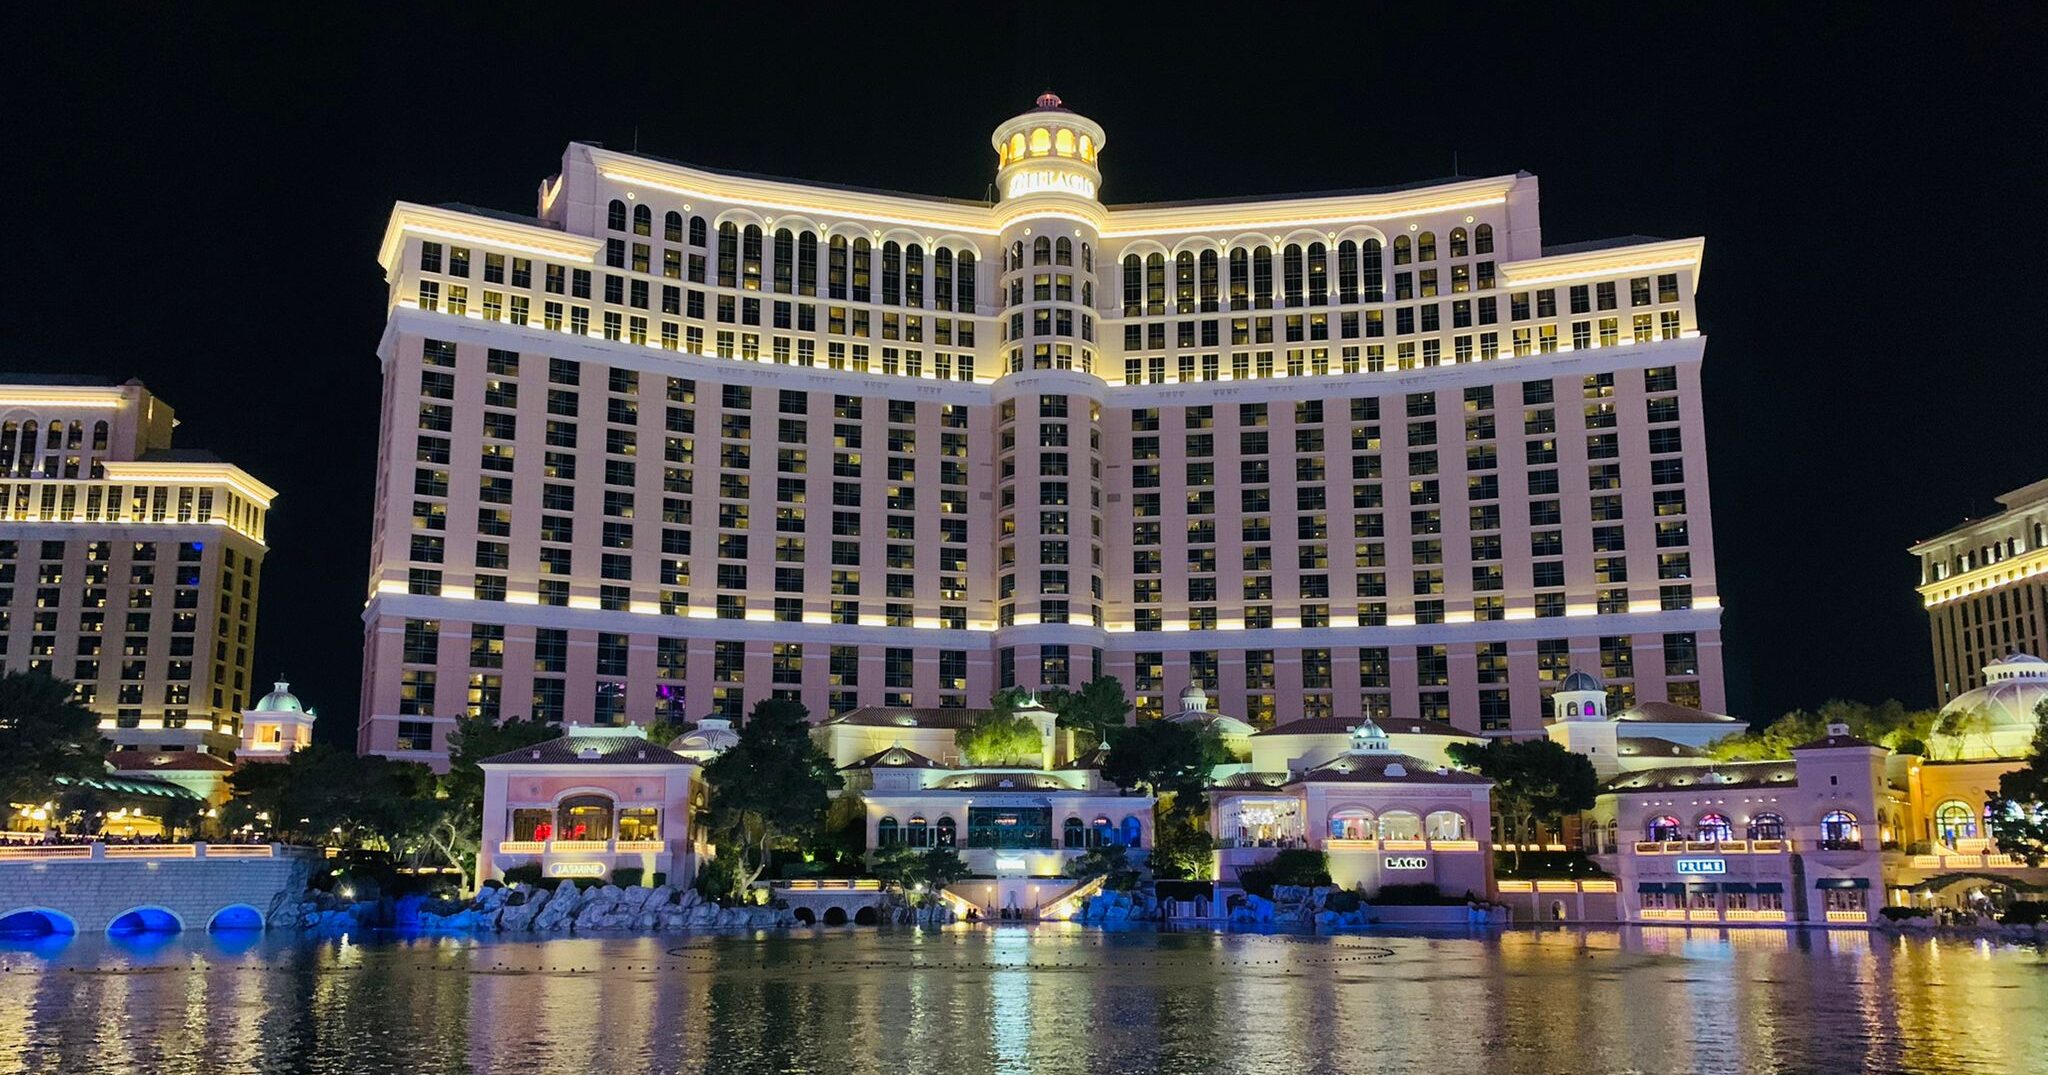 Bellagio - One of the best looking Las Vegas hotels and the epitome of class and luxury